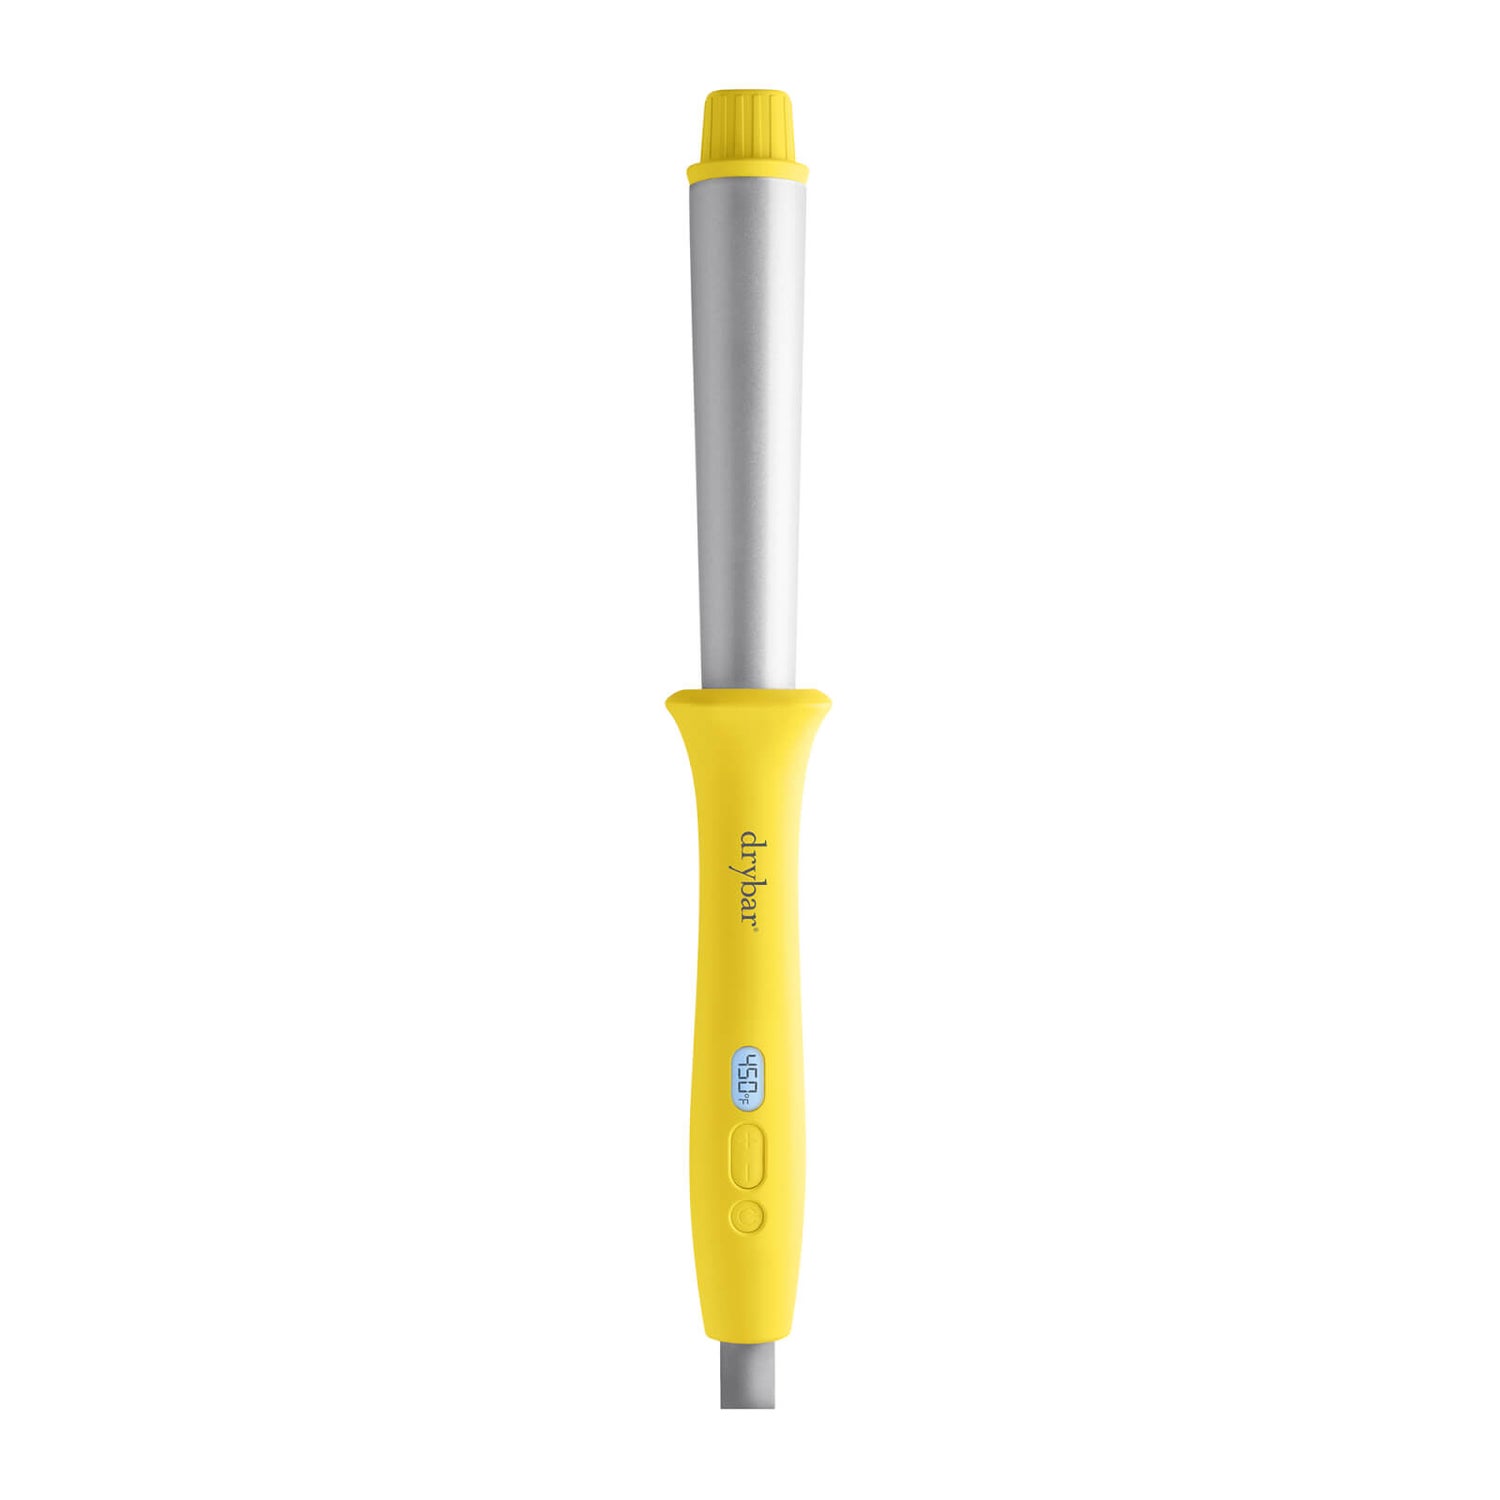 Drybar The Wrap Party Curling & Styling Wand - UK